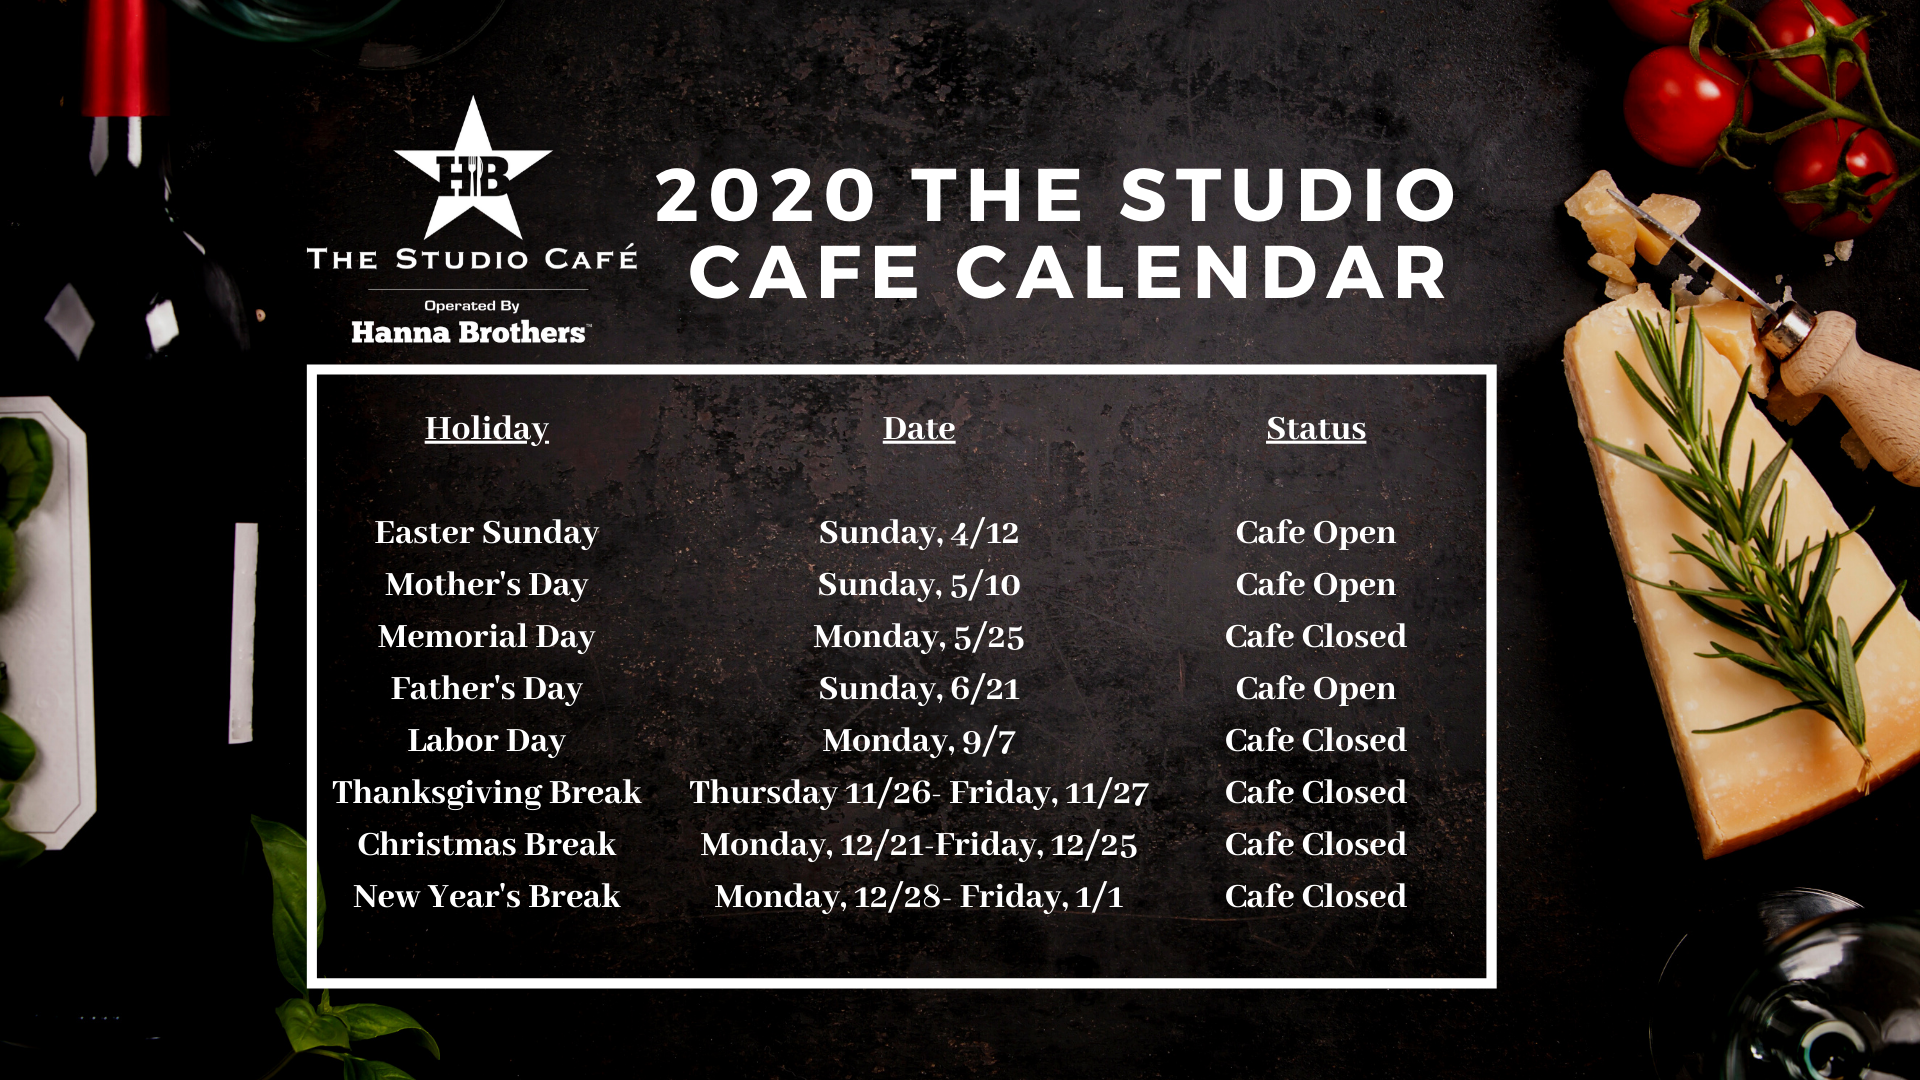 The Studio Cafe 2020 Calendar The Studio Cafe Operated by Hanna